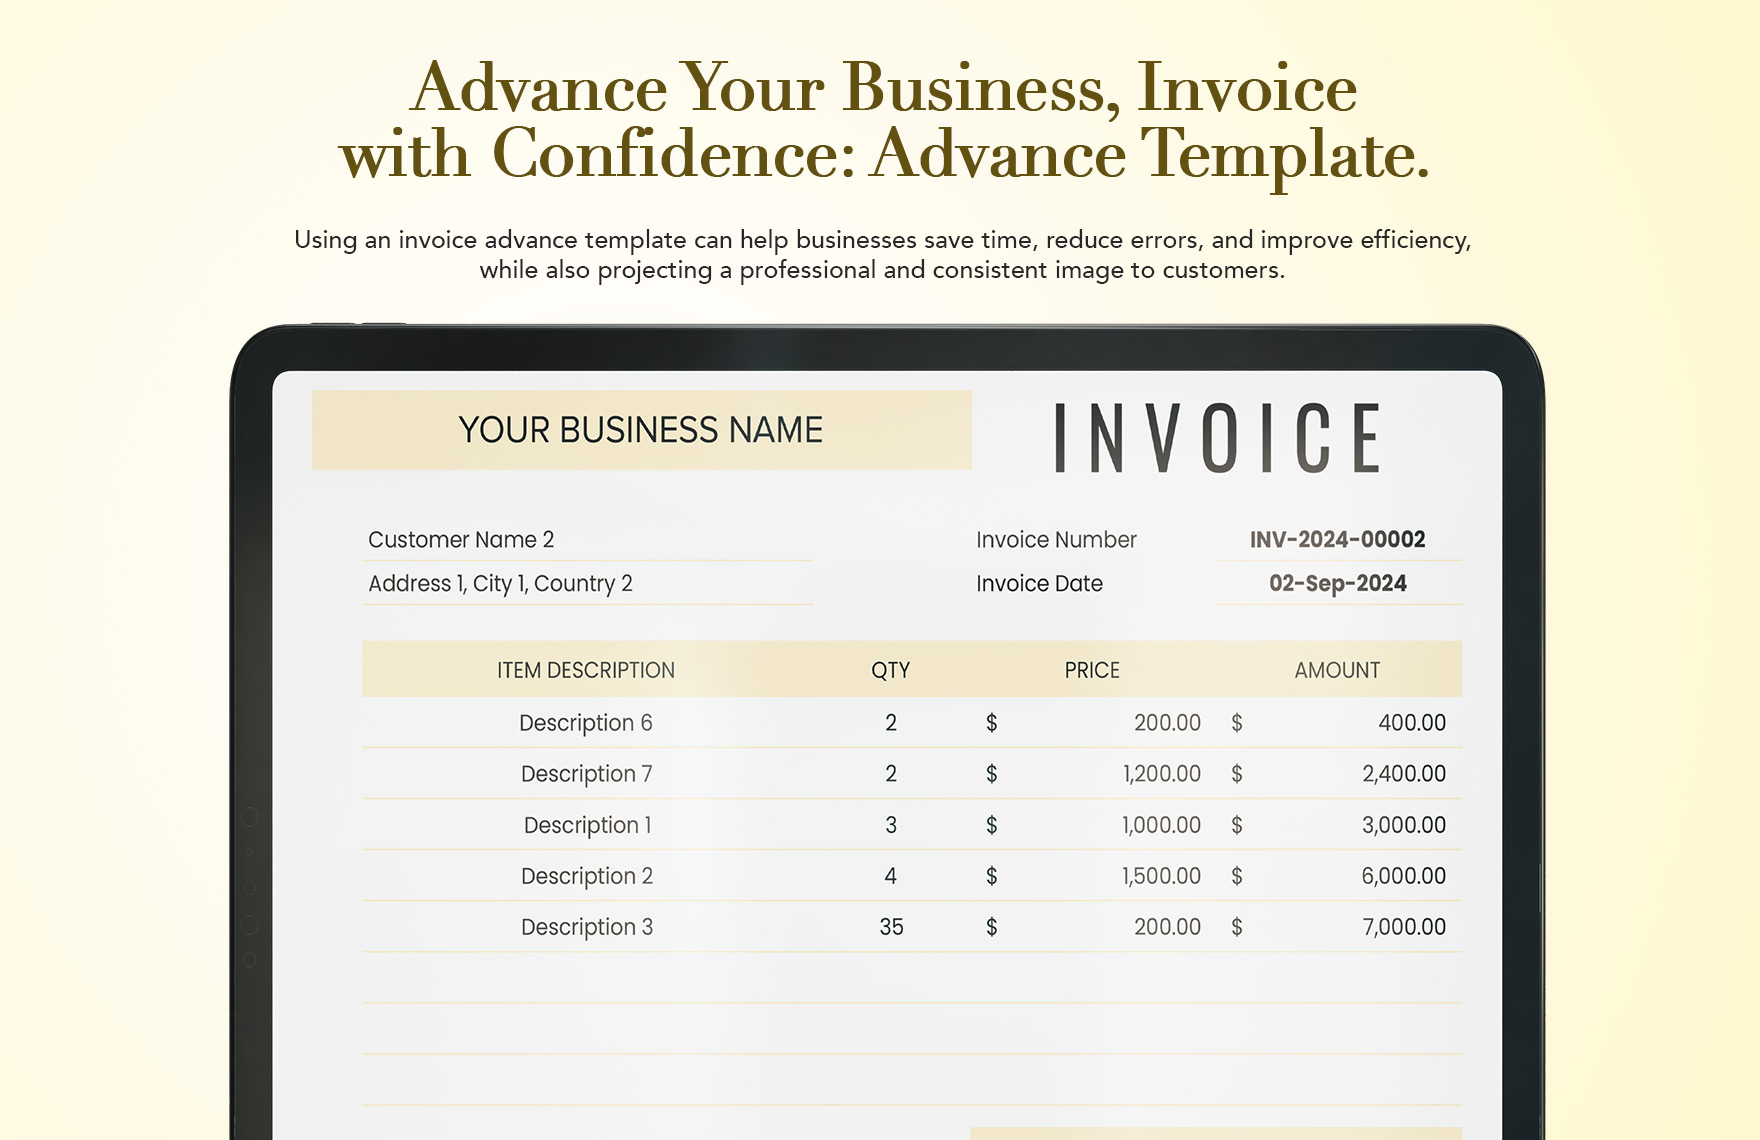 Invoice for Advance Template